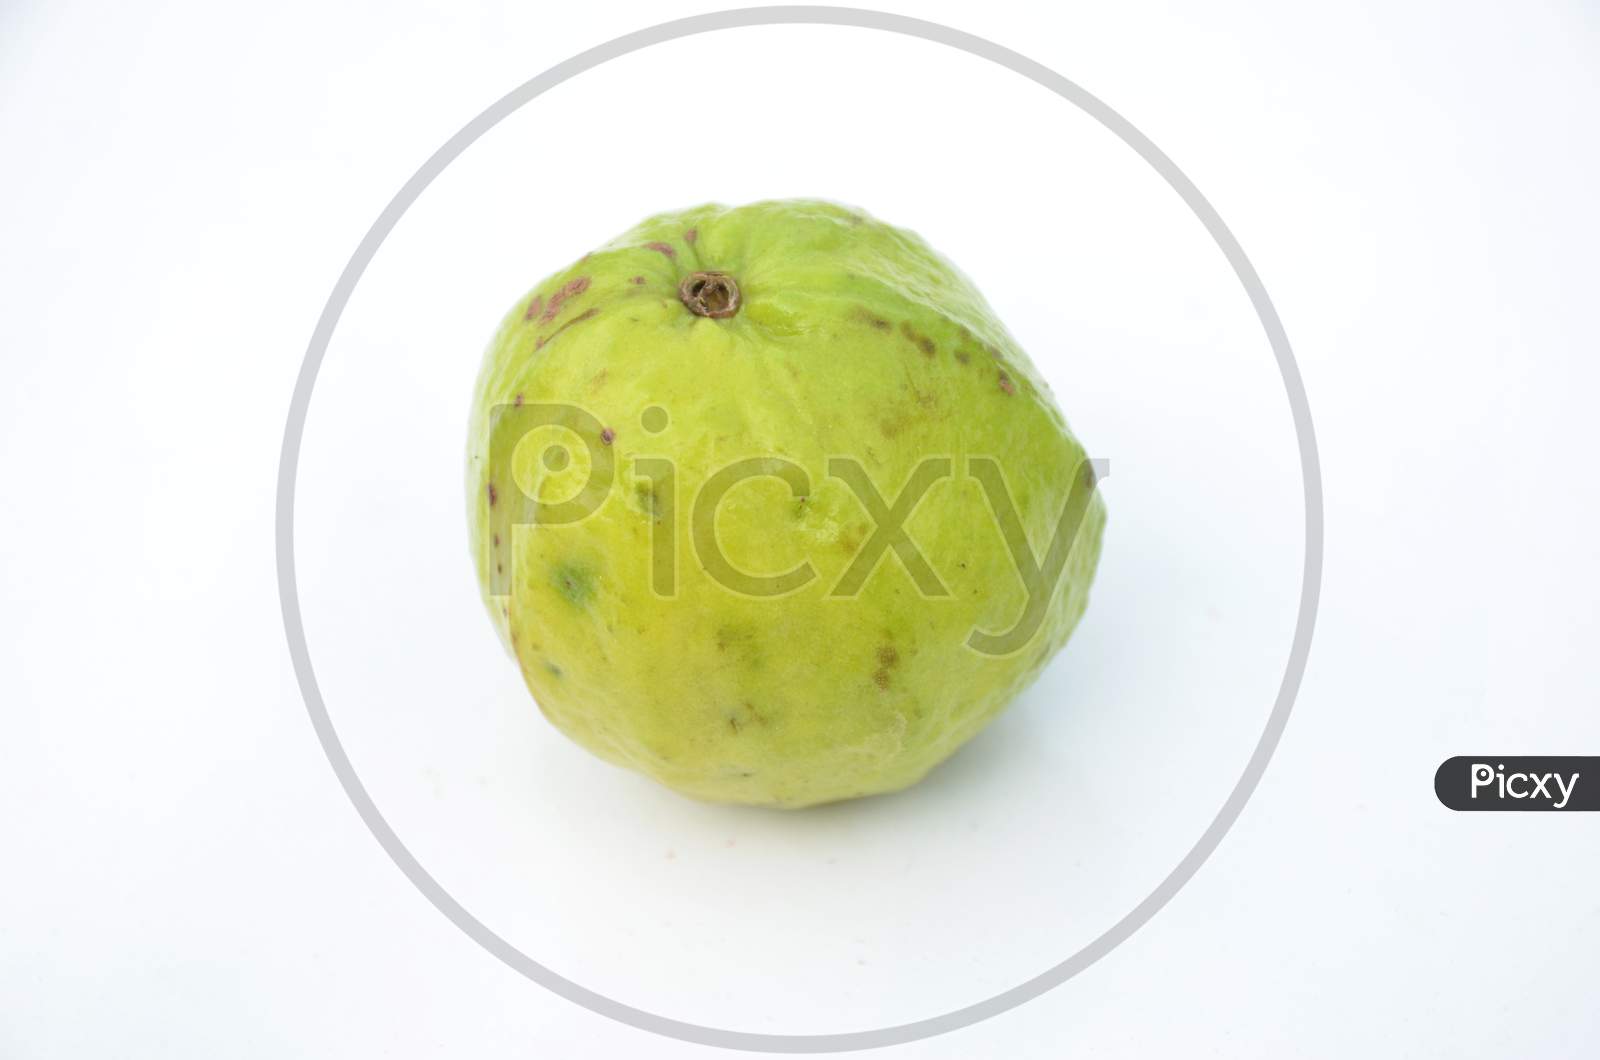 The Ripe Green White Guava Fruit Isolated On White Background.